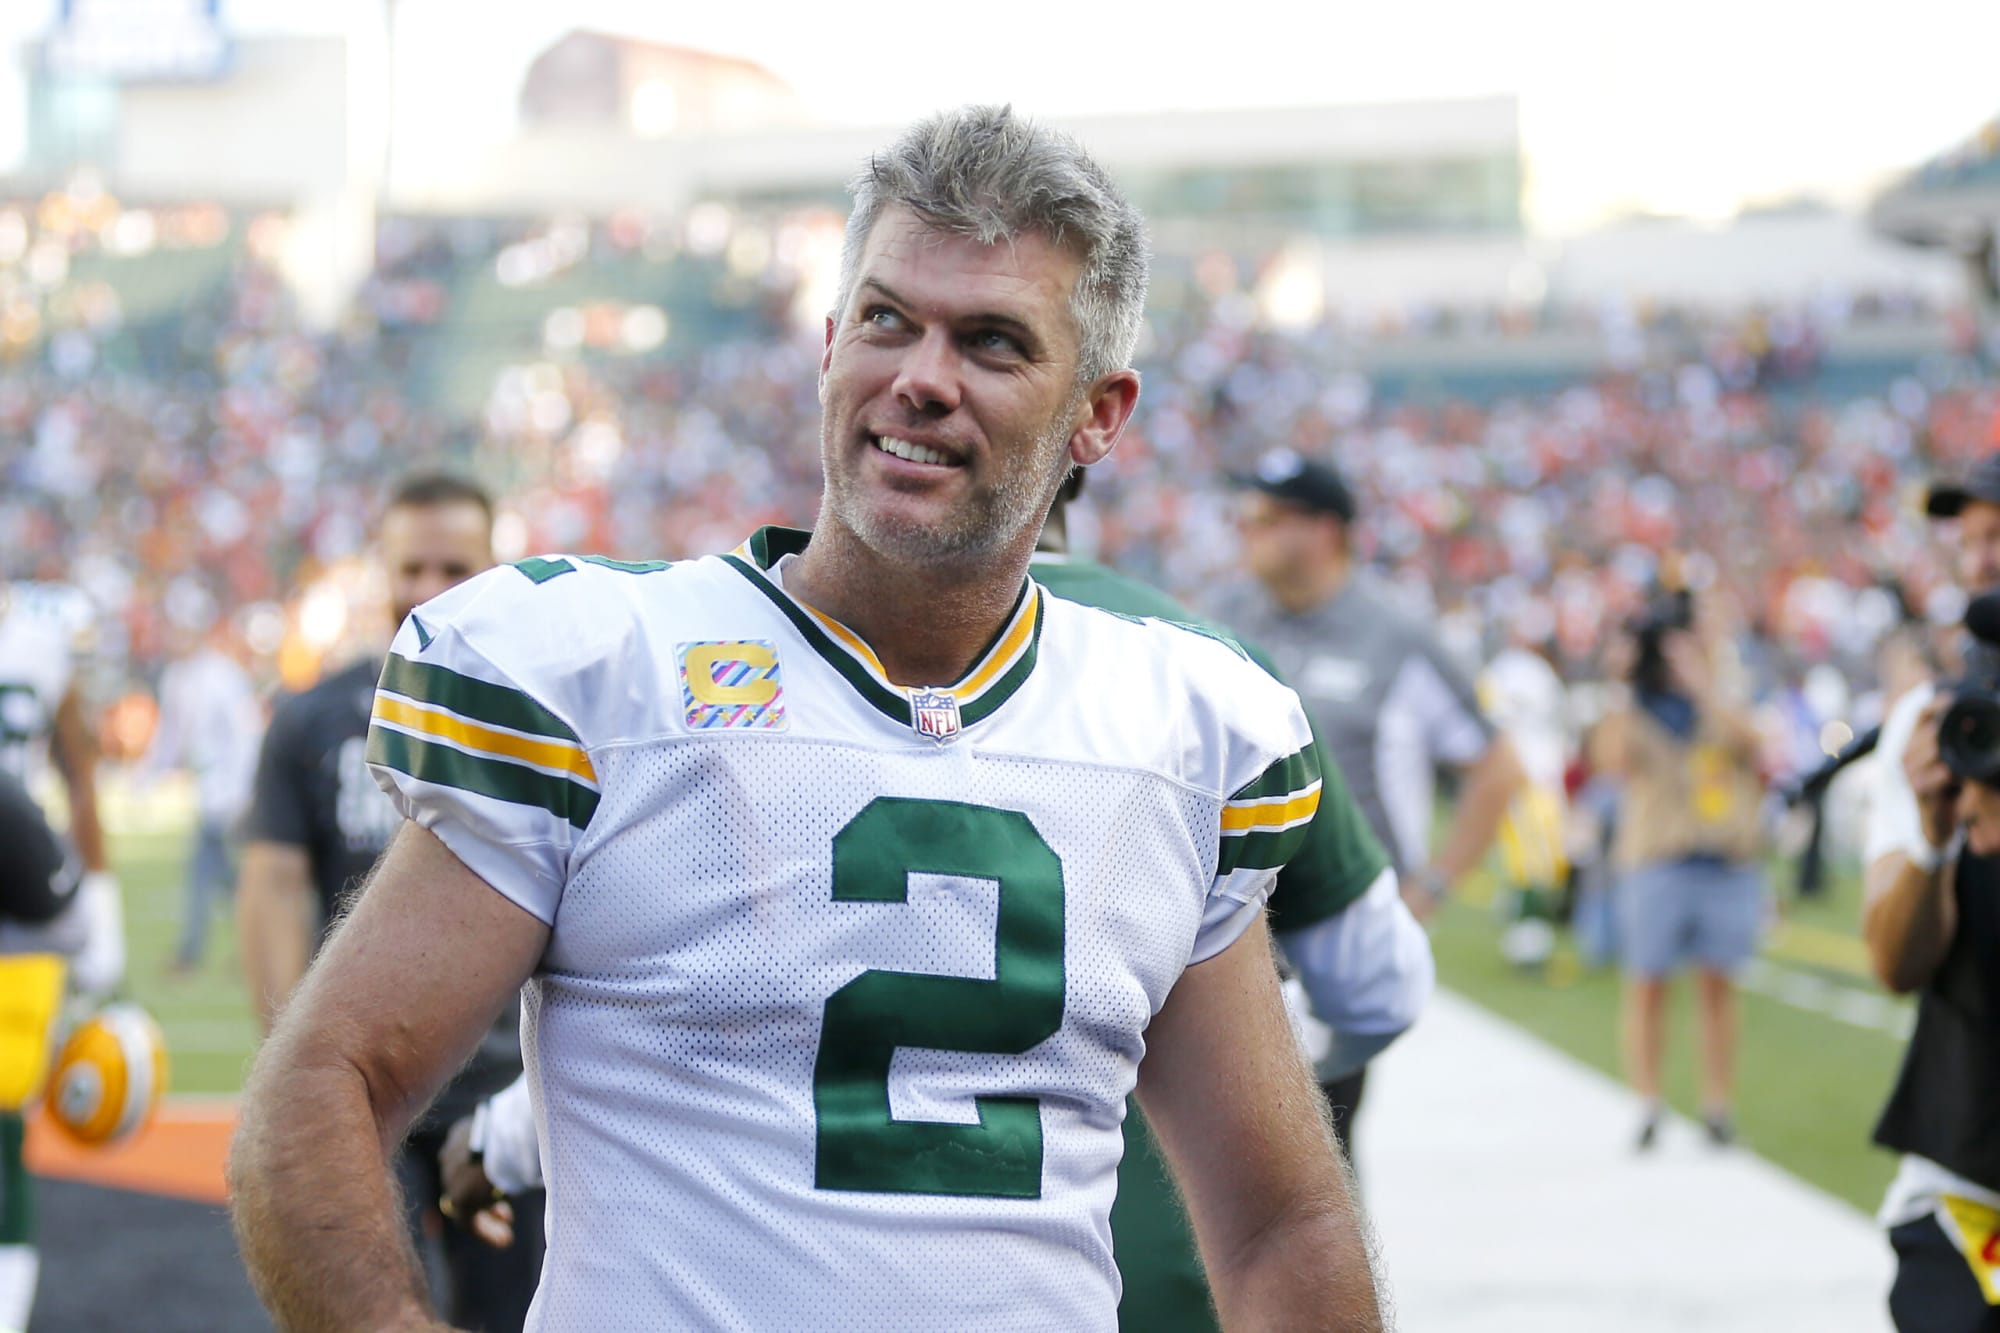 Packers legend makes it officially official that he’s not coming back